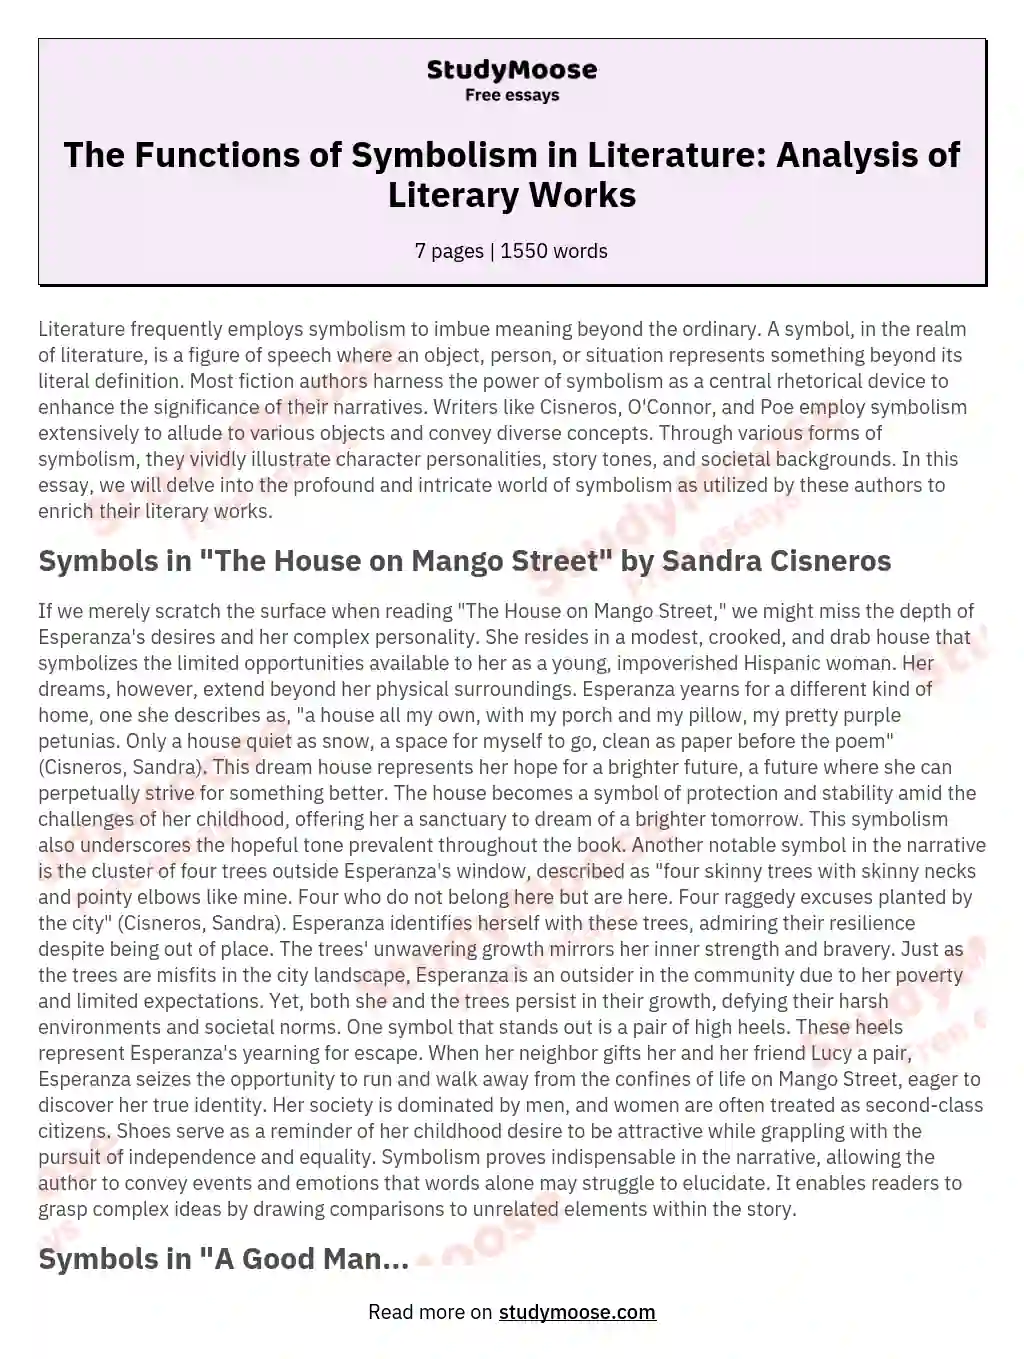 The Functions of Symbolism in Literature: Analysis of Literary Works essay